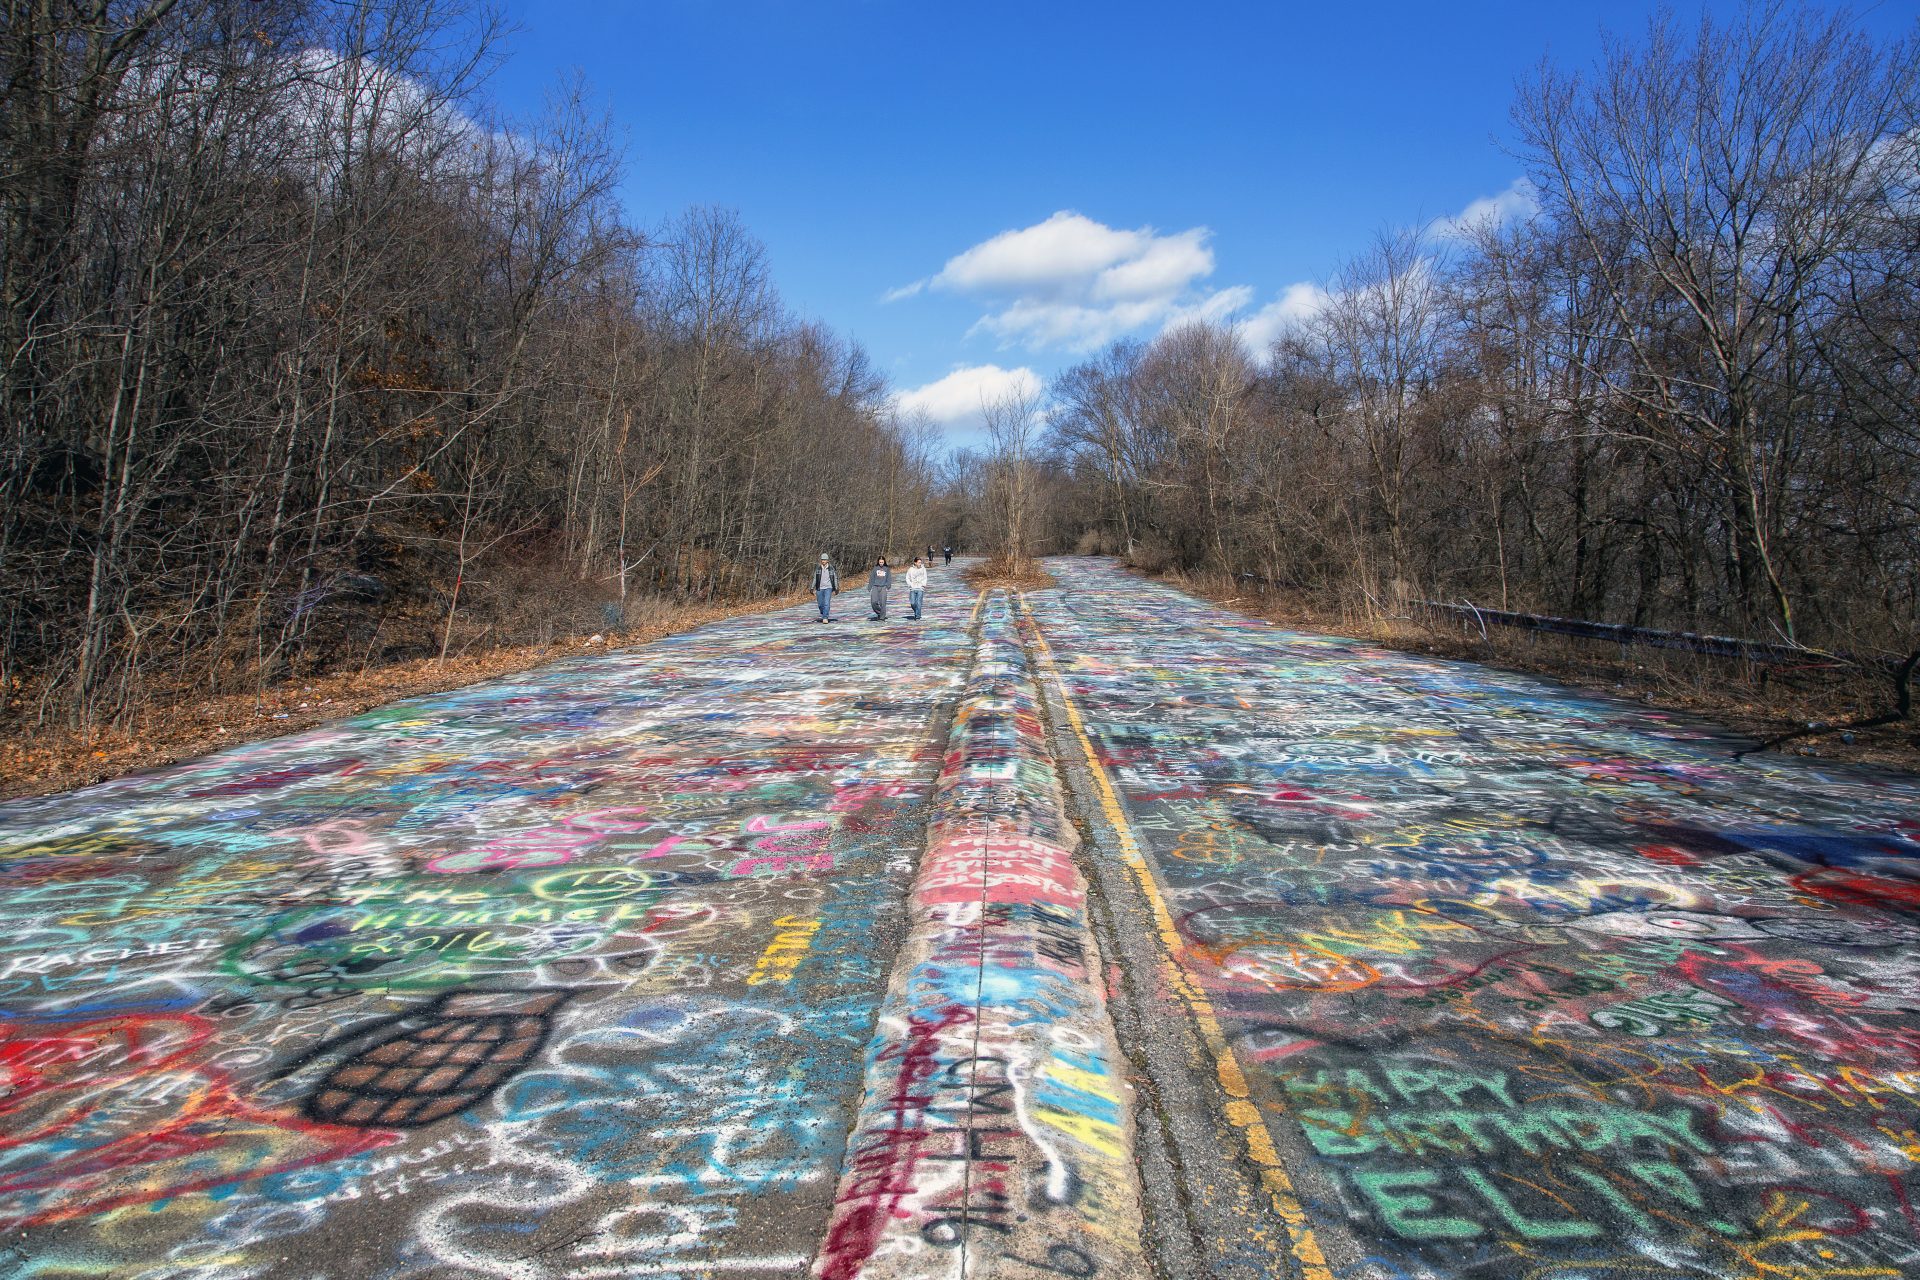 Centralia: The Pennsylvania ghost town with a 50-year-old fire